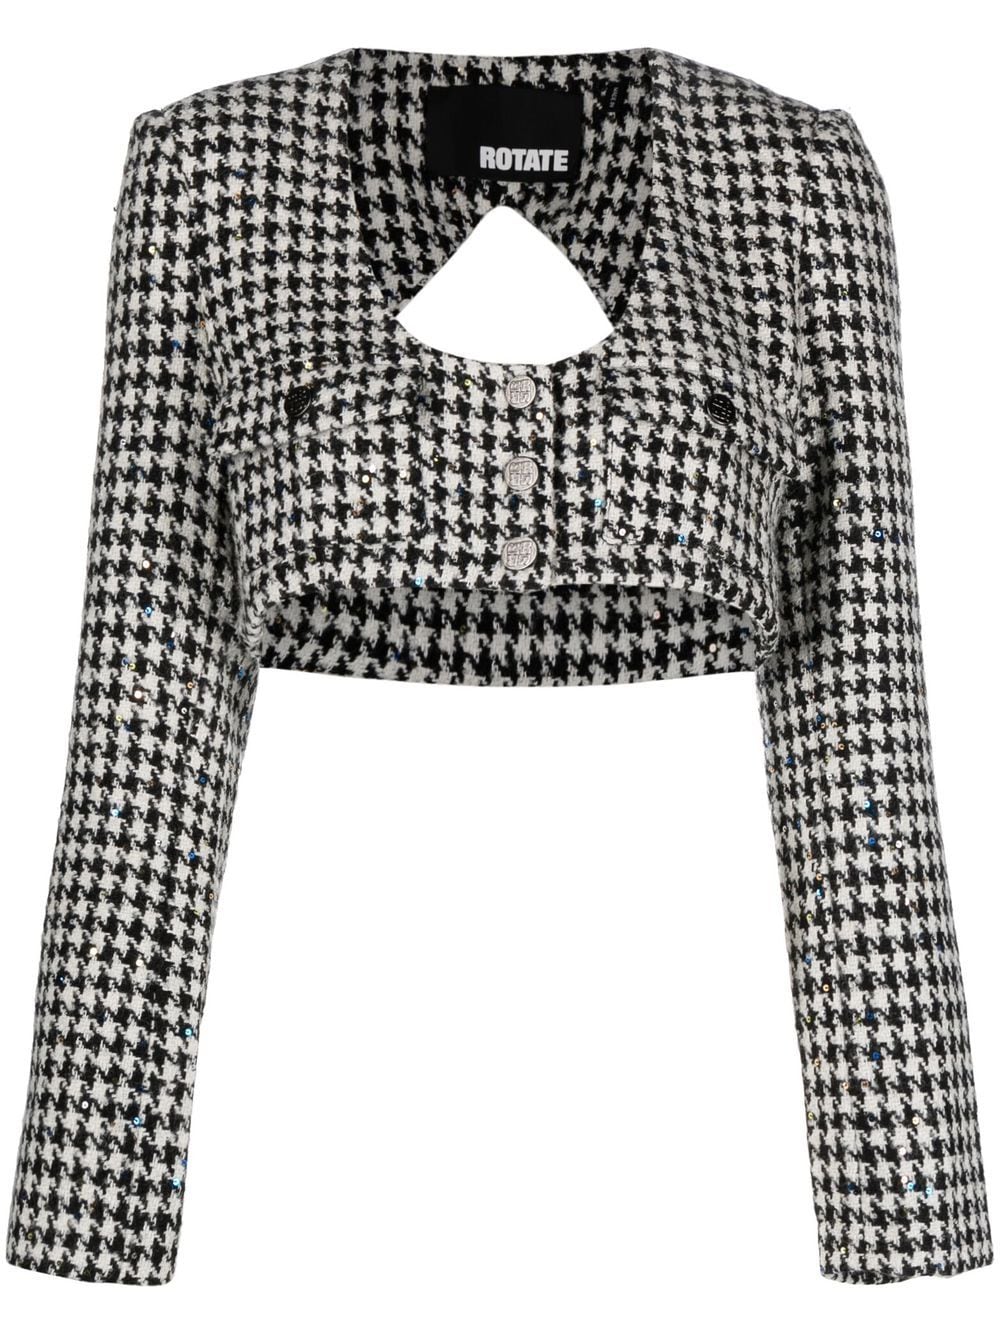 ROTATE houndstooth-pattern open-back cropped jacket - Black